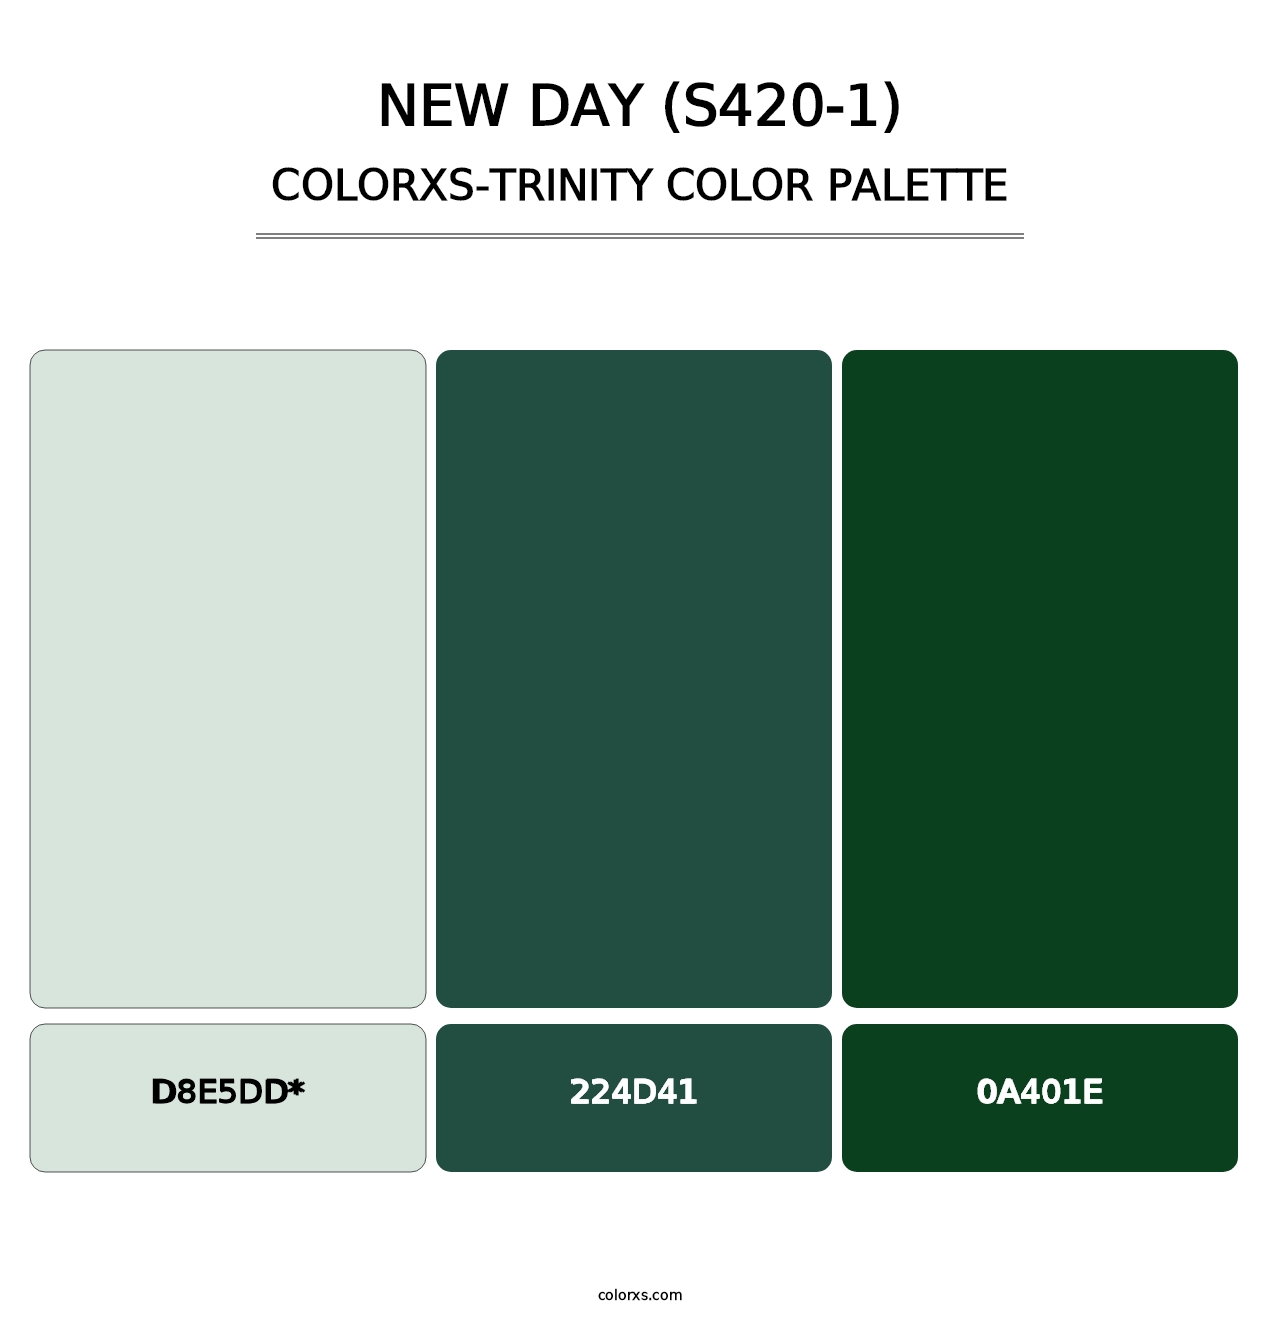 New Day (S420-1) - Colorxs Trinity Palette